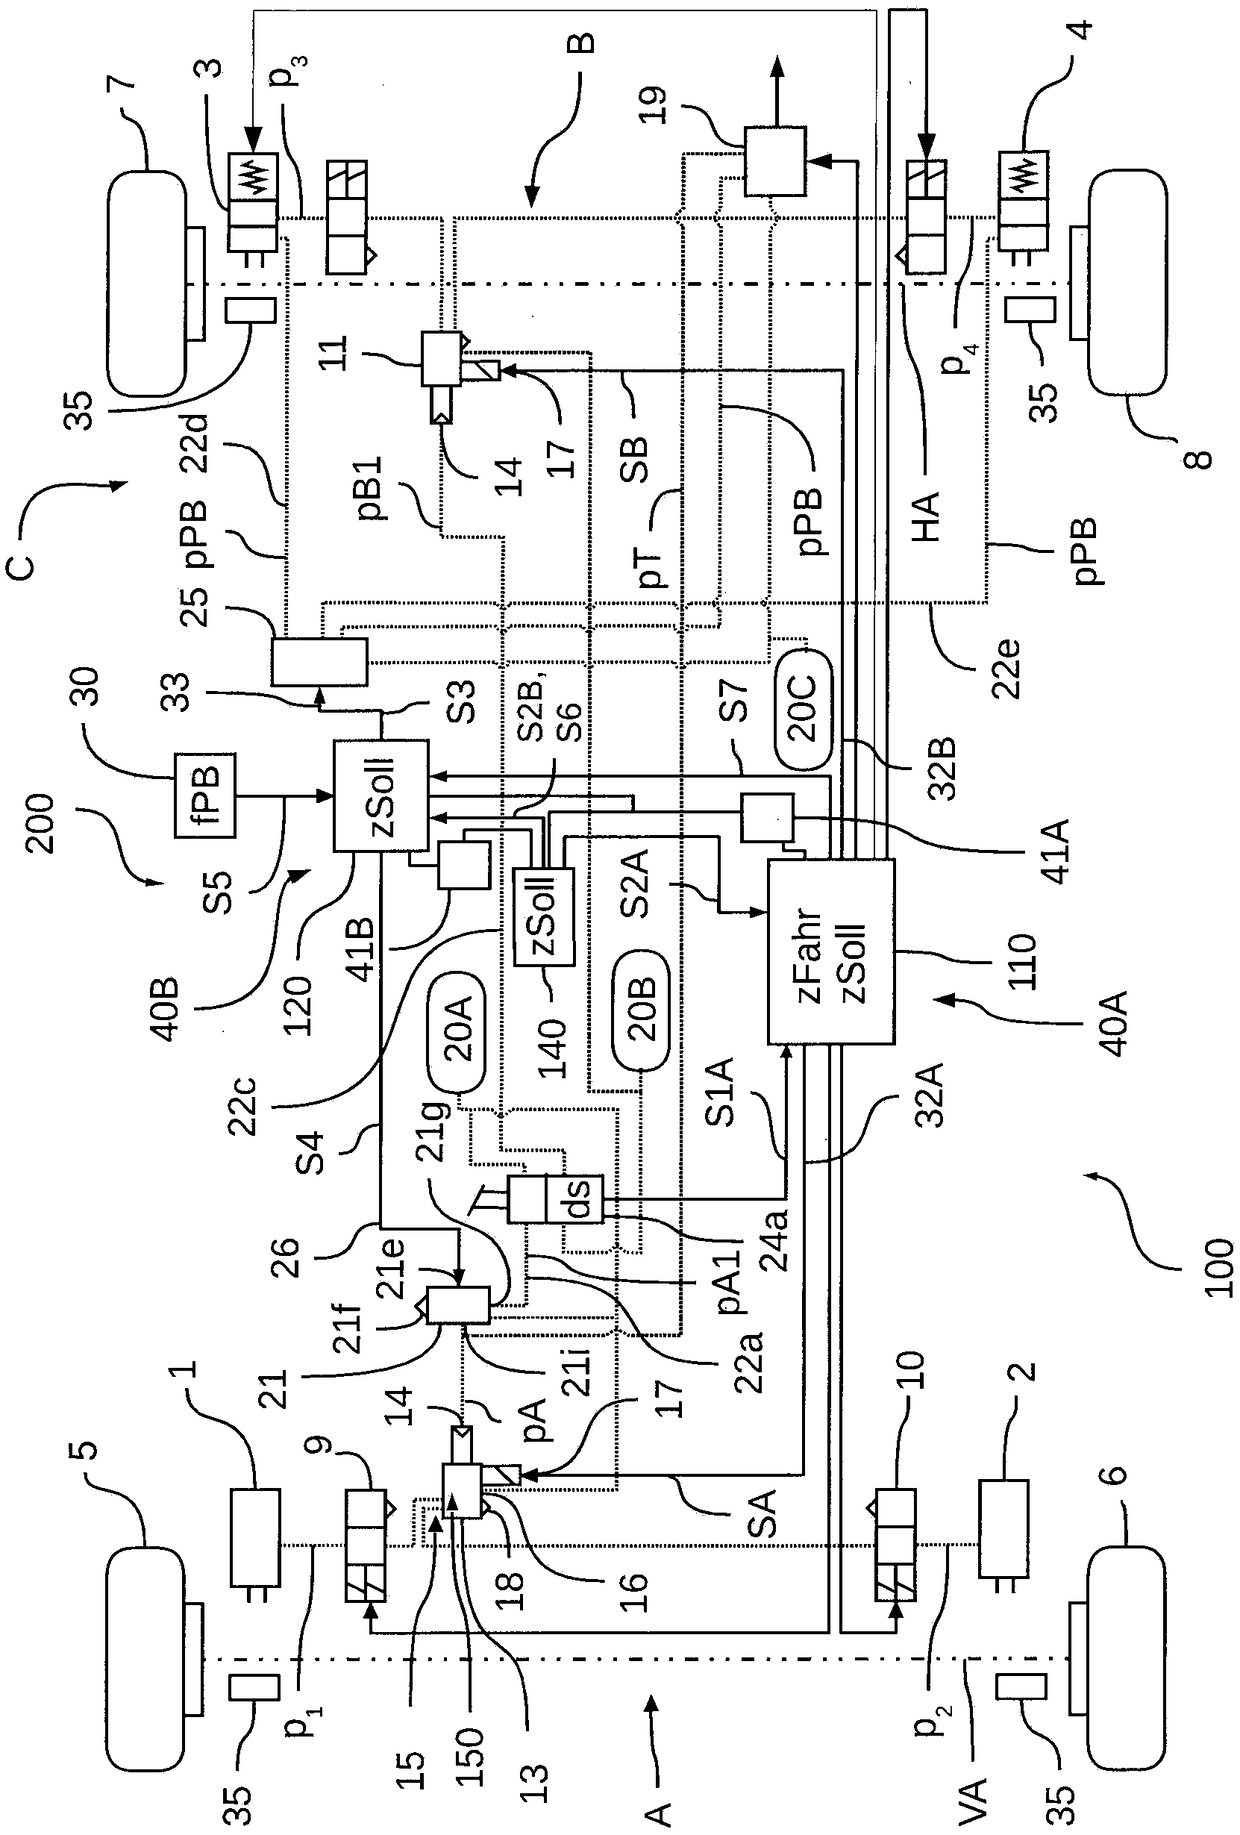 Electronically controllable pneumatic brake system in a utility vehicle and method for electronically controlling a pneumatic brake system